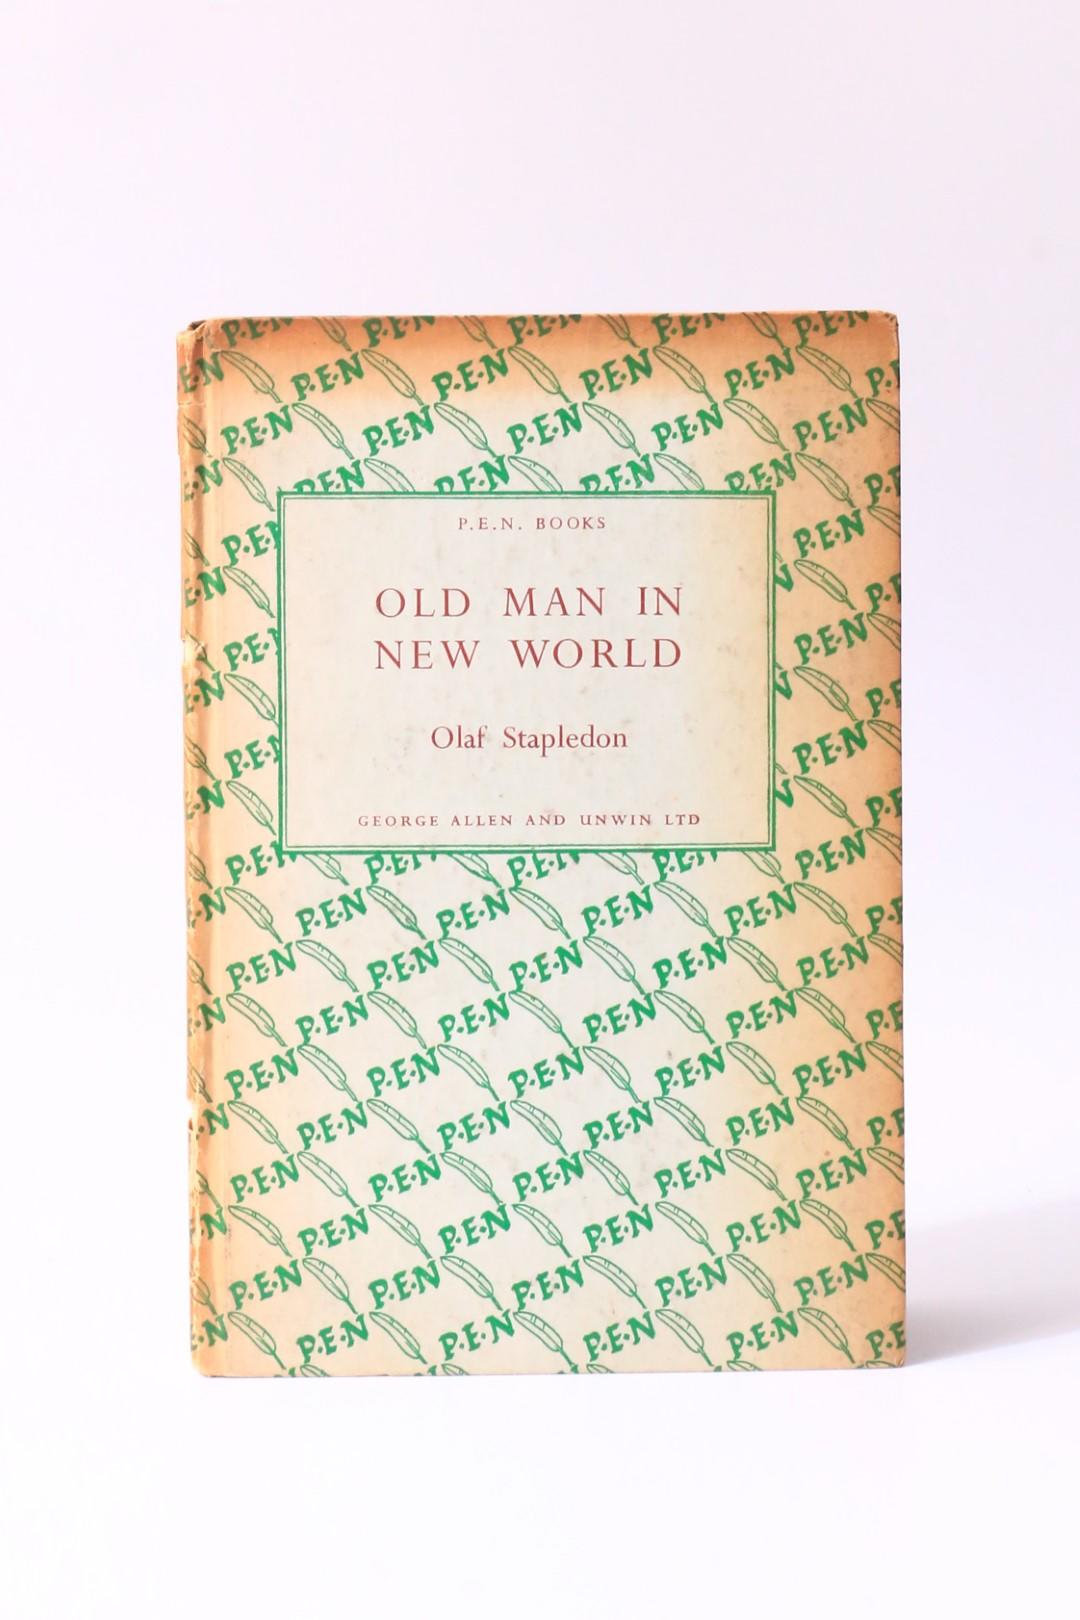 Olaf Stapledon - Old Man in New World - George Allen & Unwin, 1944, First Edition.